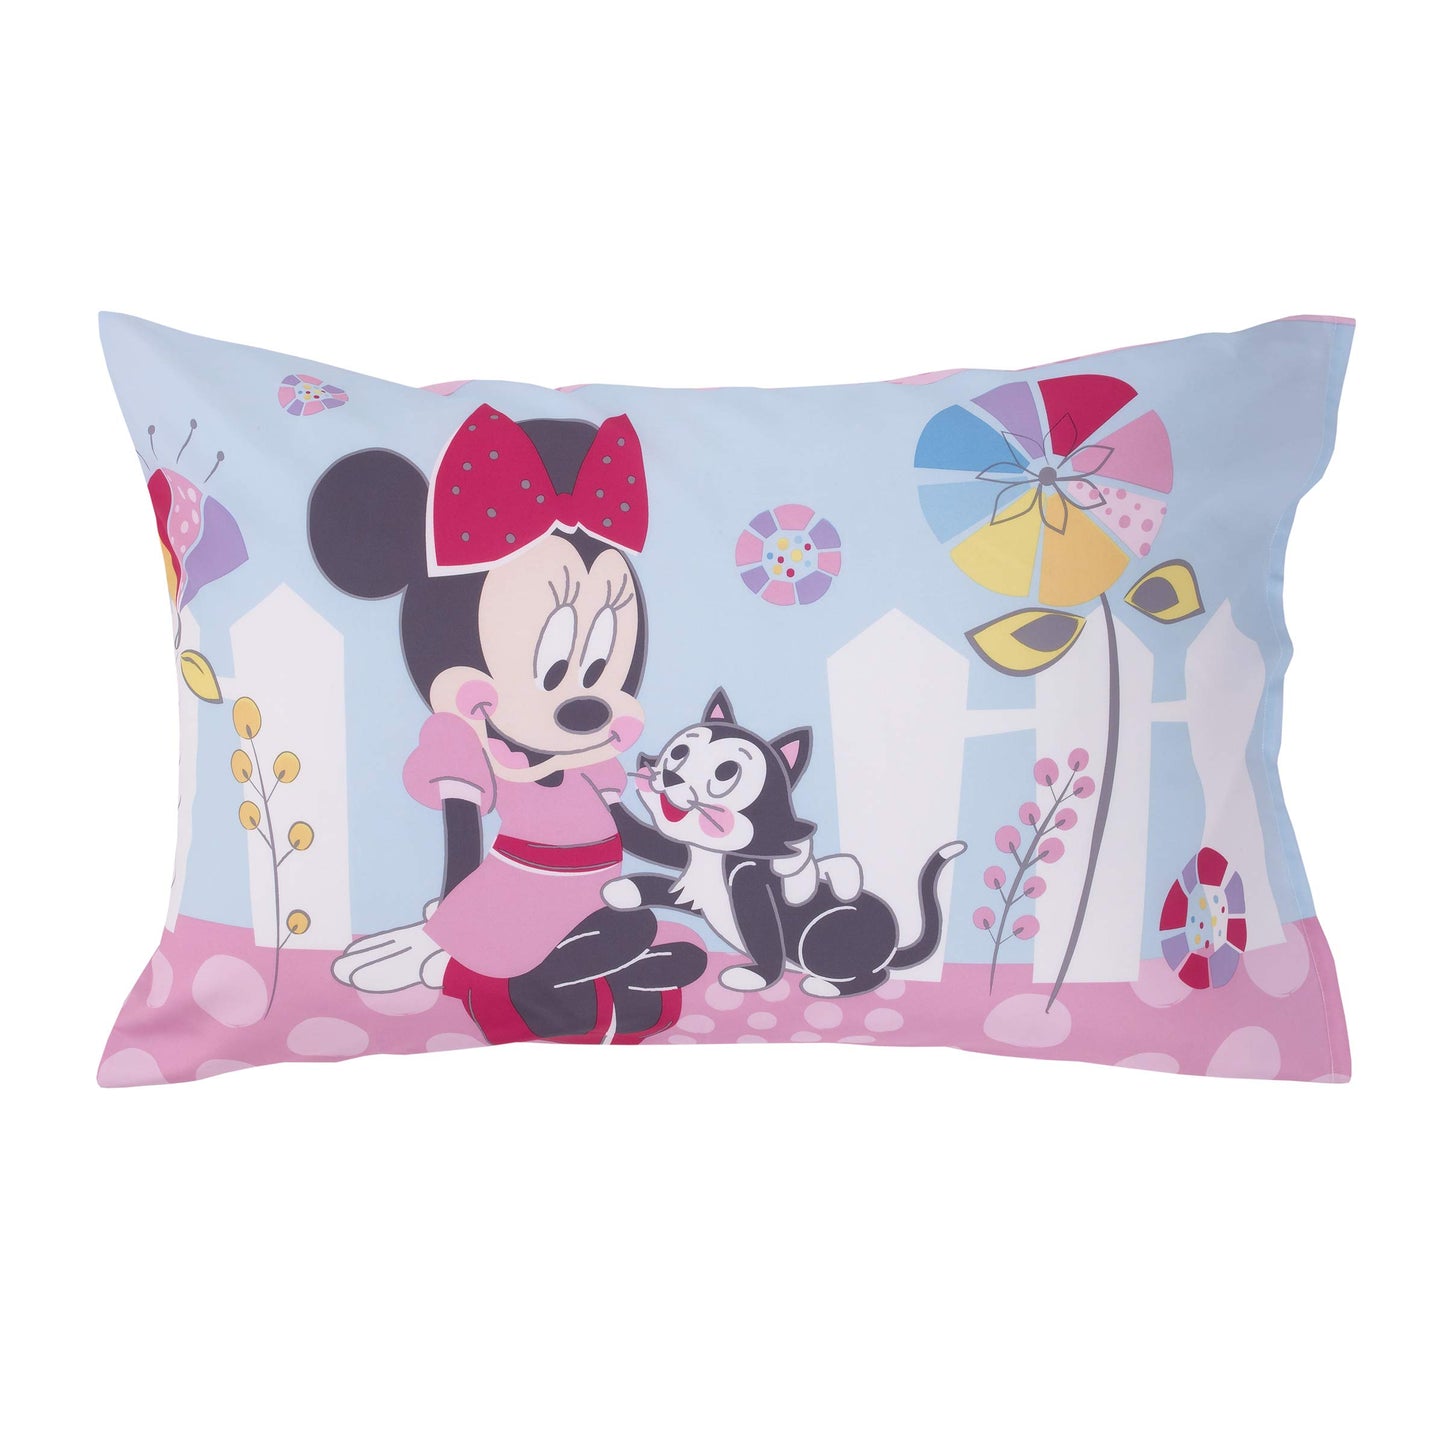 Disney Minnie Mouse - Minnie in Pink 4Piece Toddler Bed Set - Comforter, Reversible Pillowcase, Flat Top Sheet &amp; Fitted Bottom Sheet, Pink, Aqua, White,